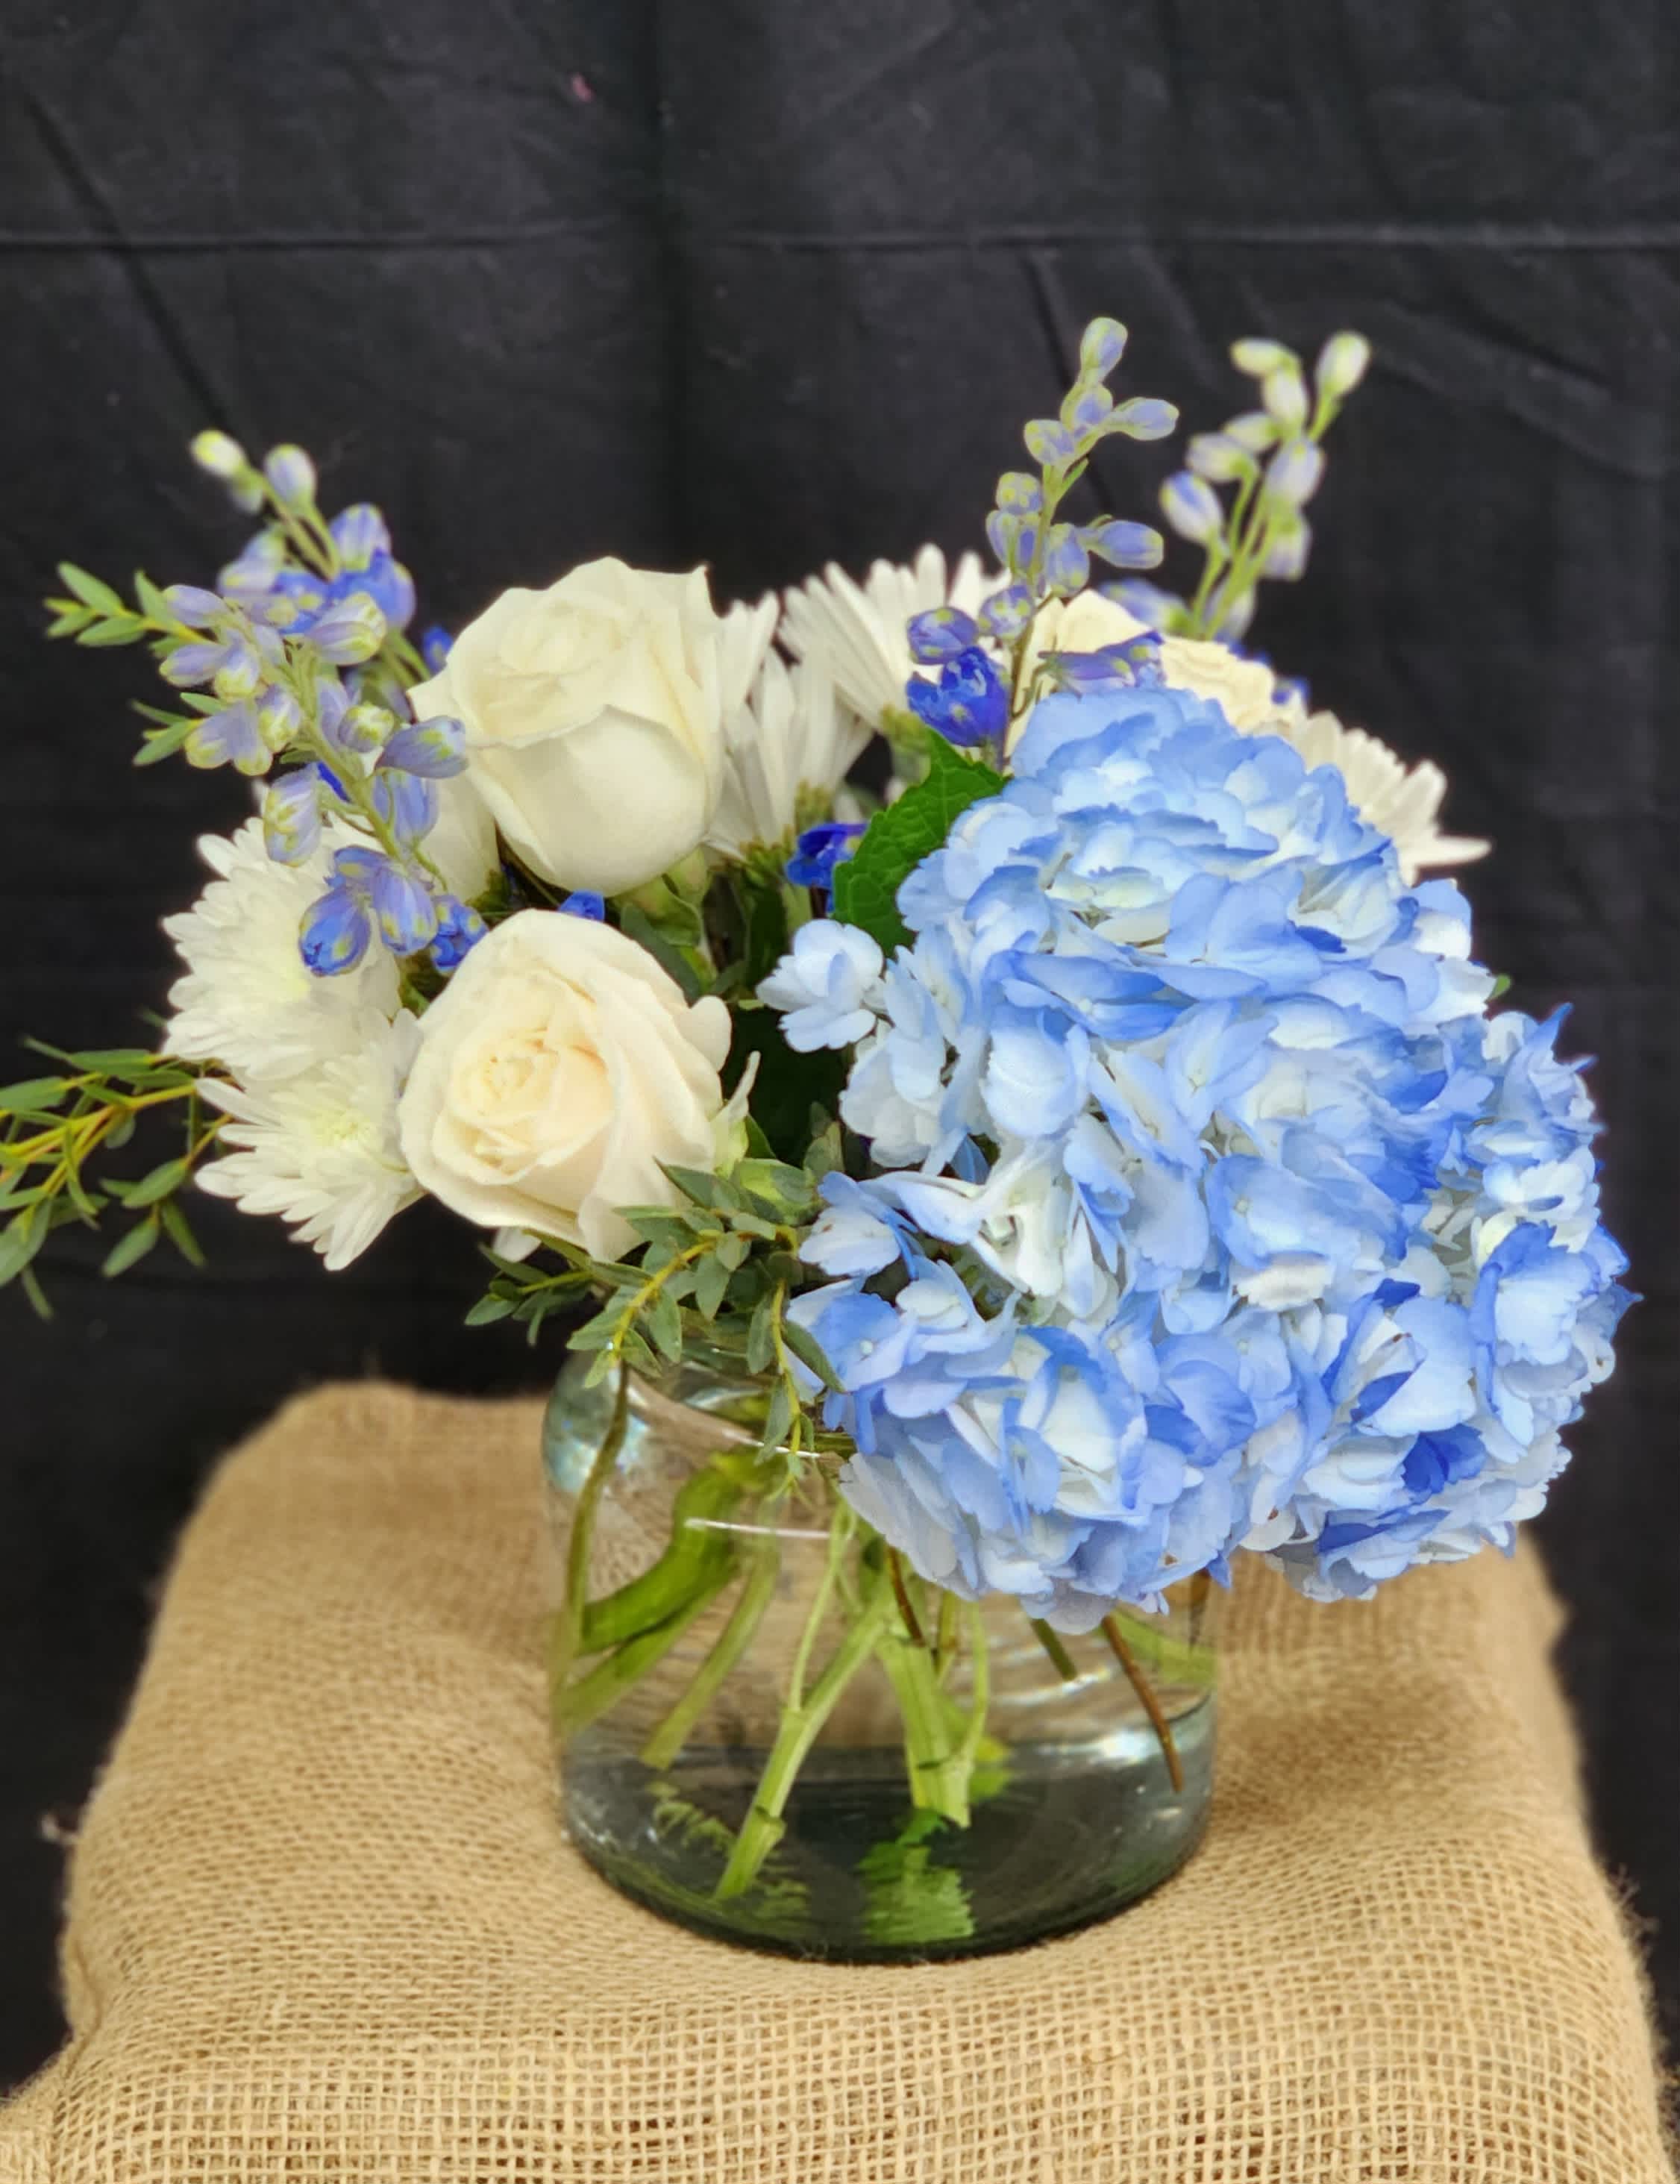 Mountain Skies - Beautiful blues contrasting against whites bring the feeling of the wonderful mountain sky. Blue delphinium, blue hydrangea, white roses and daisies make up this elegant arrangement. 